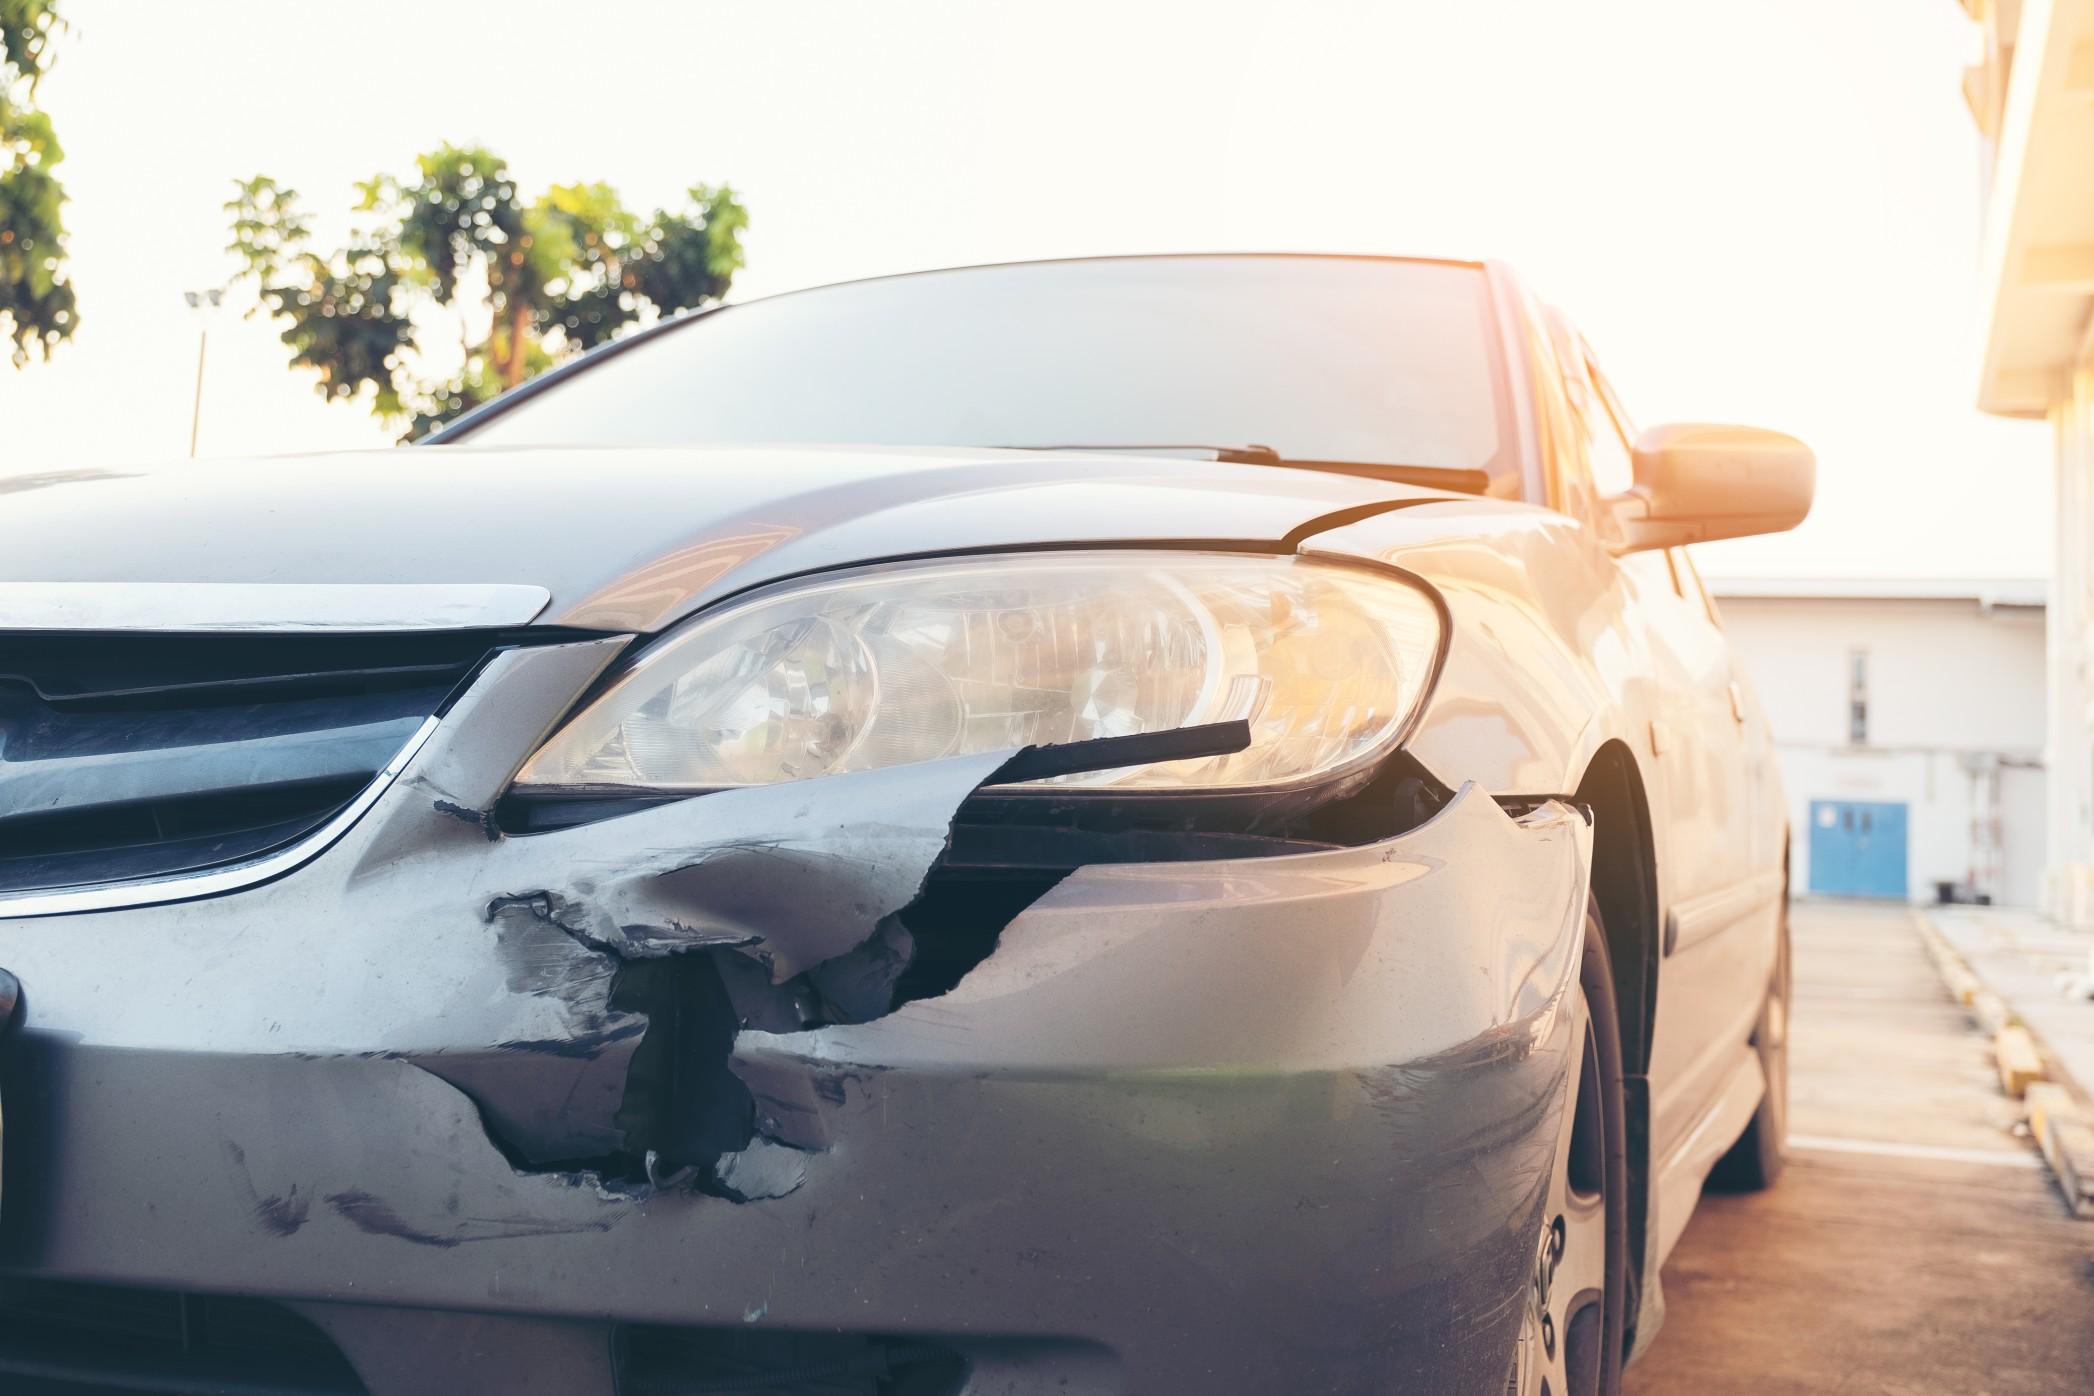 You’ve probably filed a claim before for a rear-end crash | Twenty20